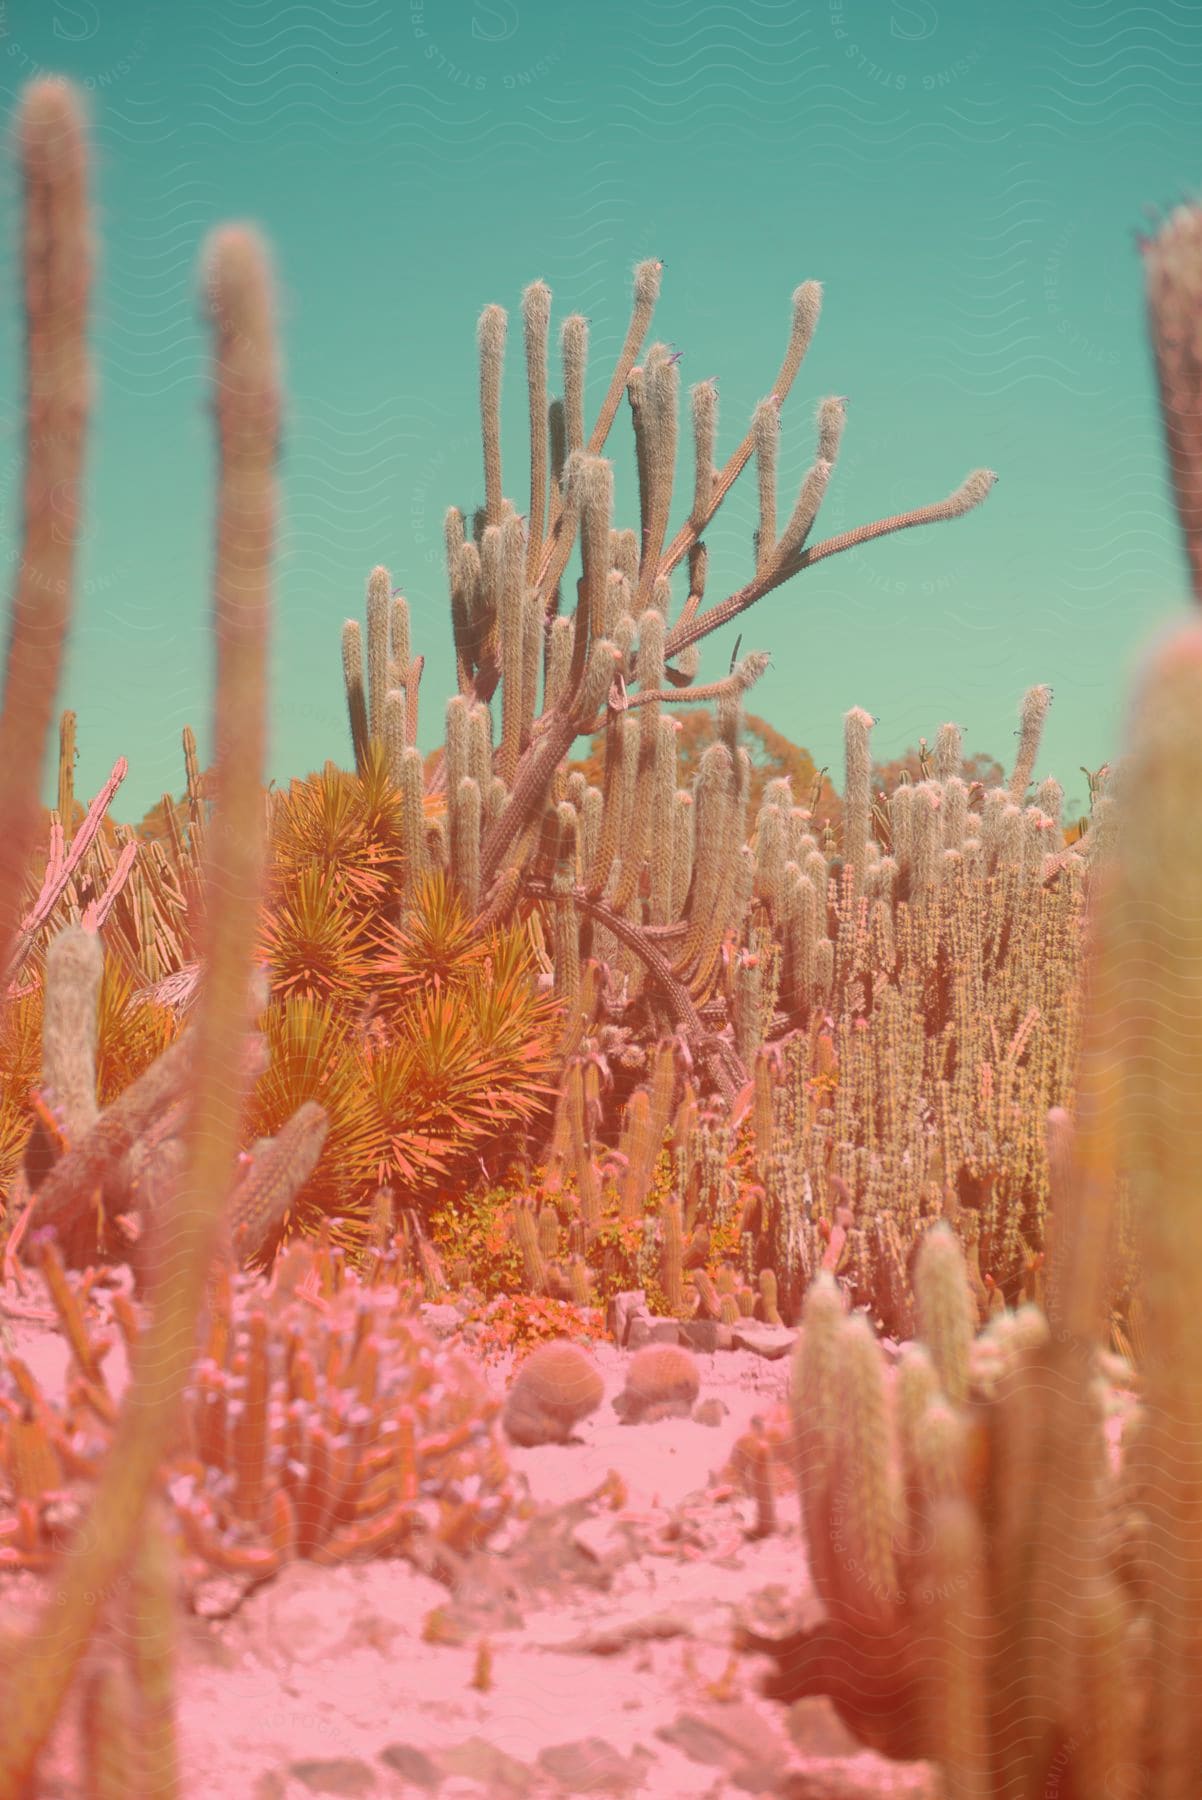 Coral and underwater plants on the seabed